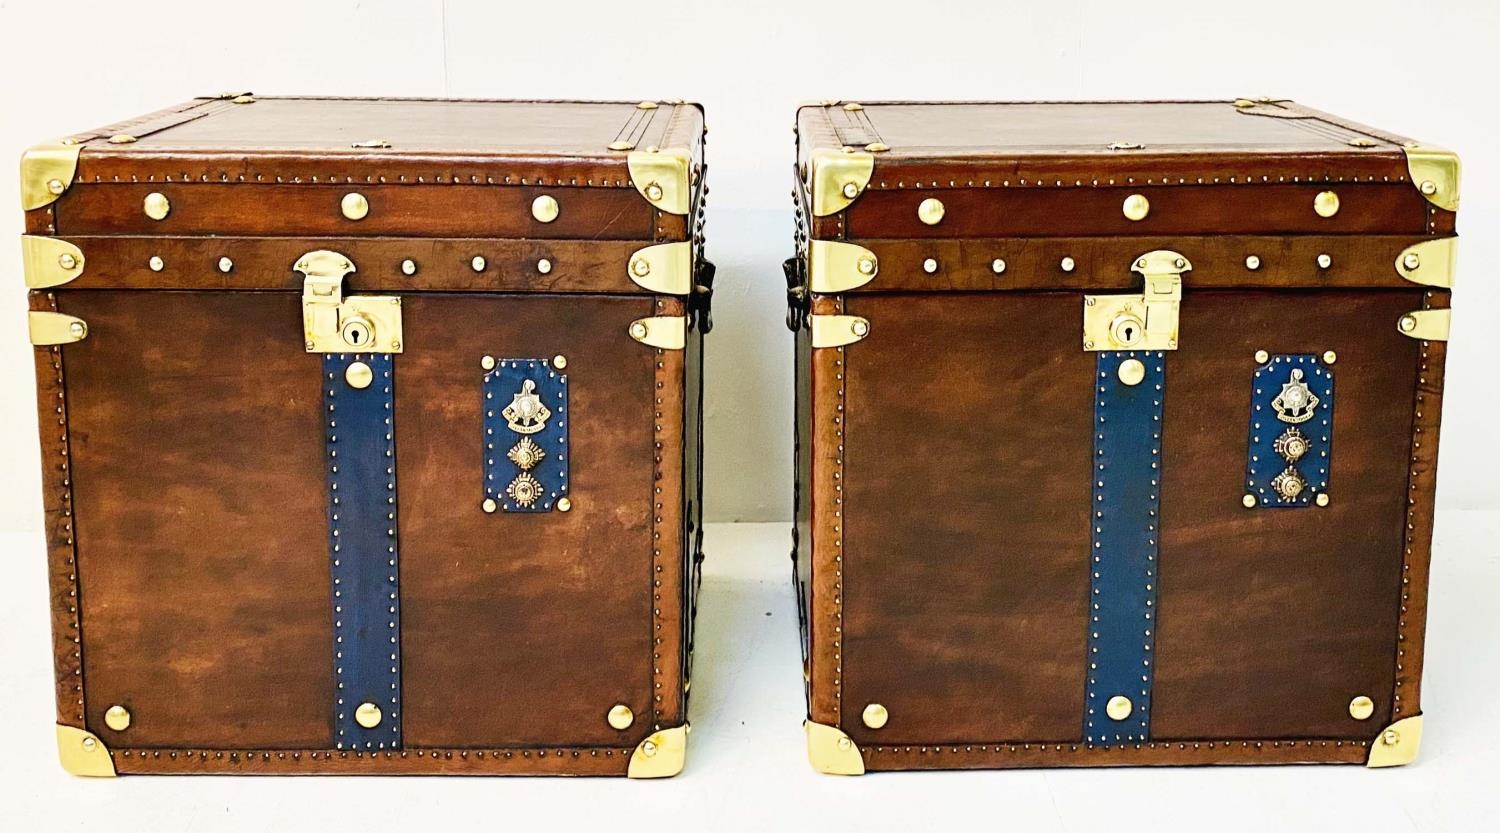 STEAMER TRUNKS, a pair, leathered and gilt metal bound with faux military decoration, 51cm H x